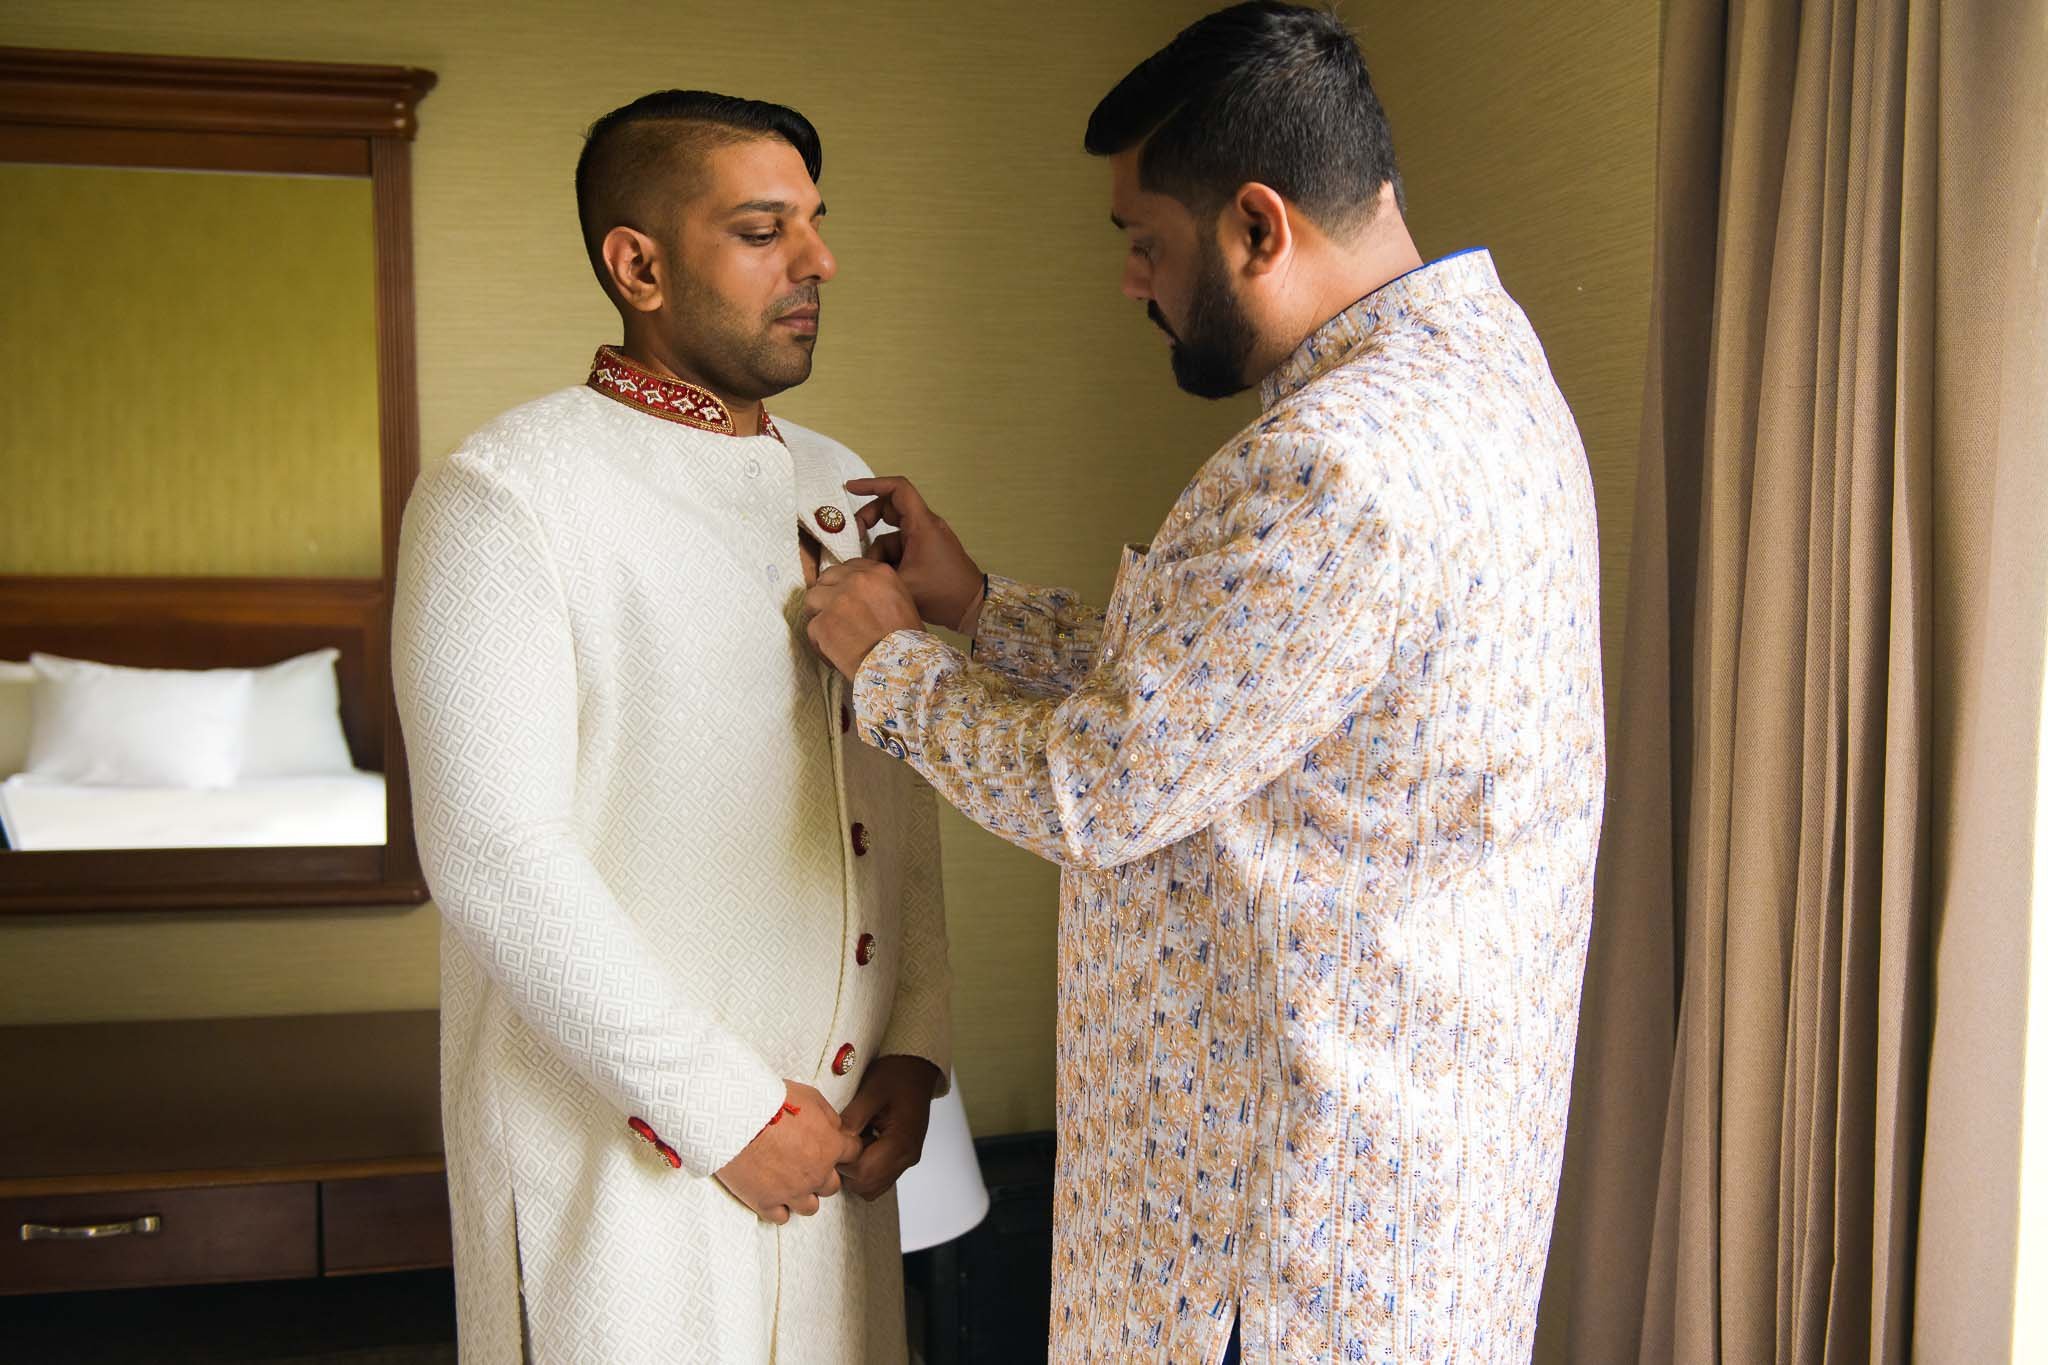  Indian groom getting ready on his wedding day with help of his brother 